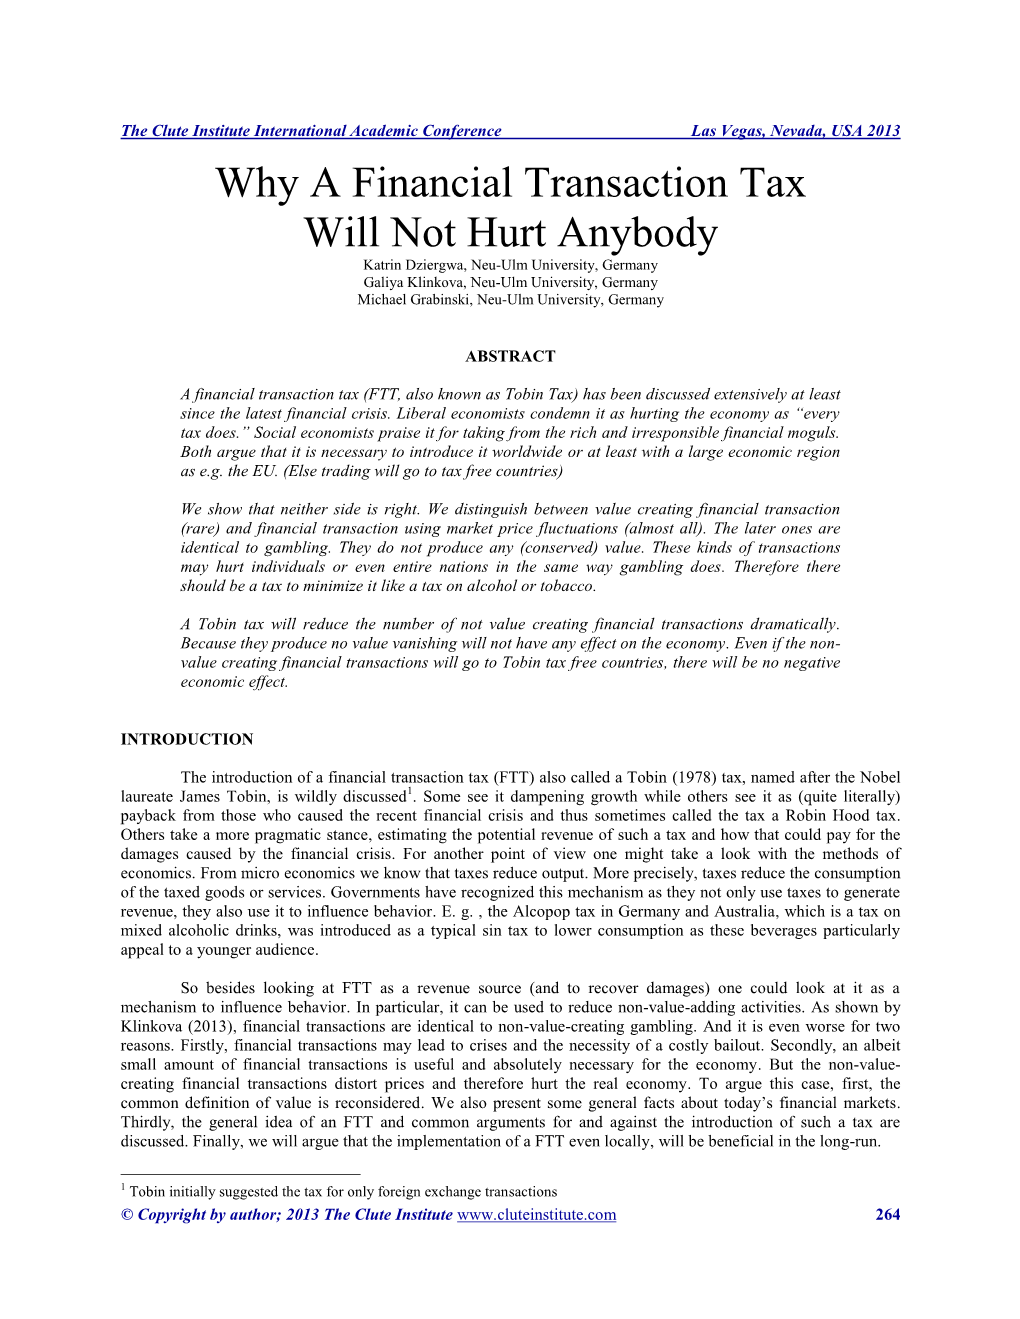 Why a Financial Transaction Tax Will Not Hurt Anybody